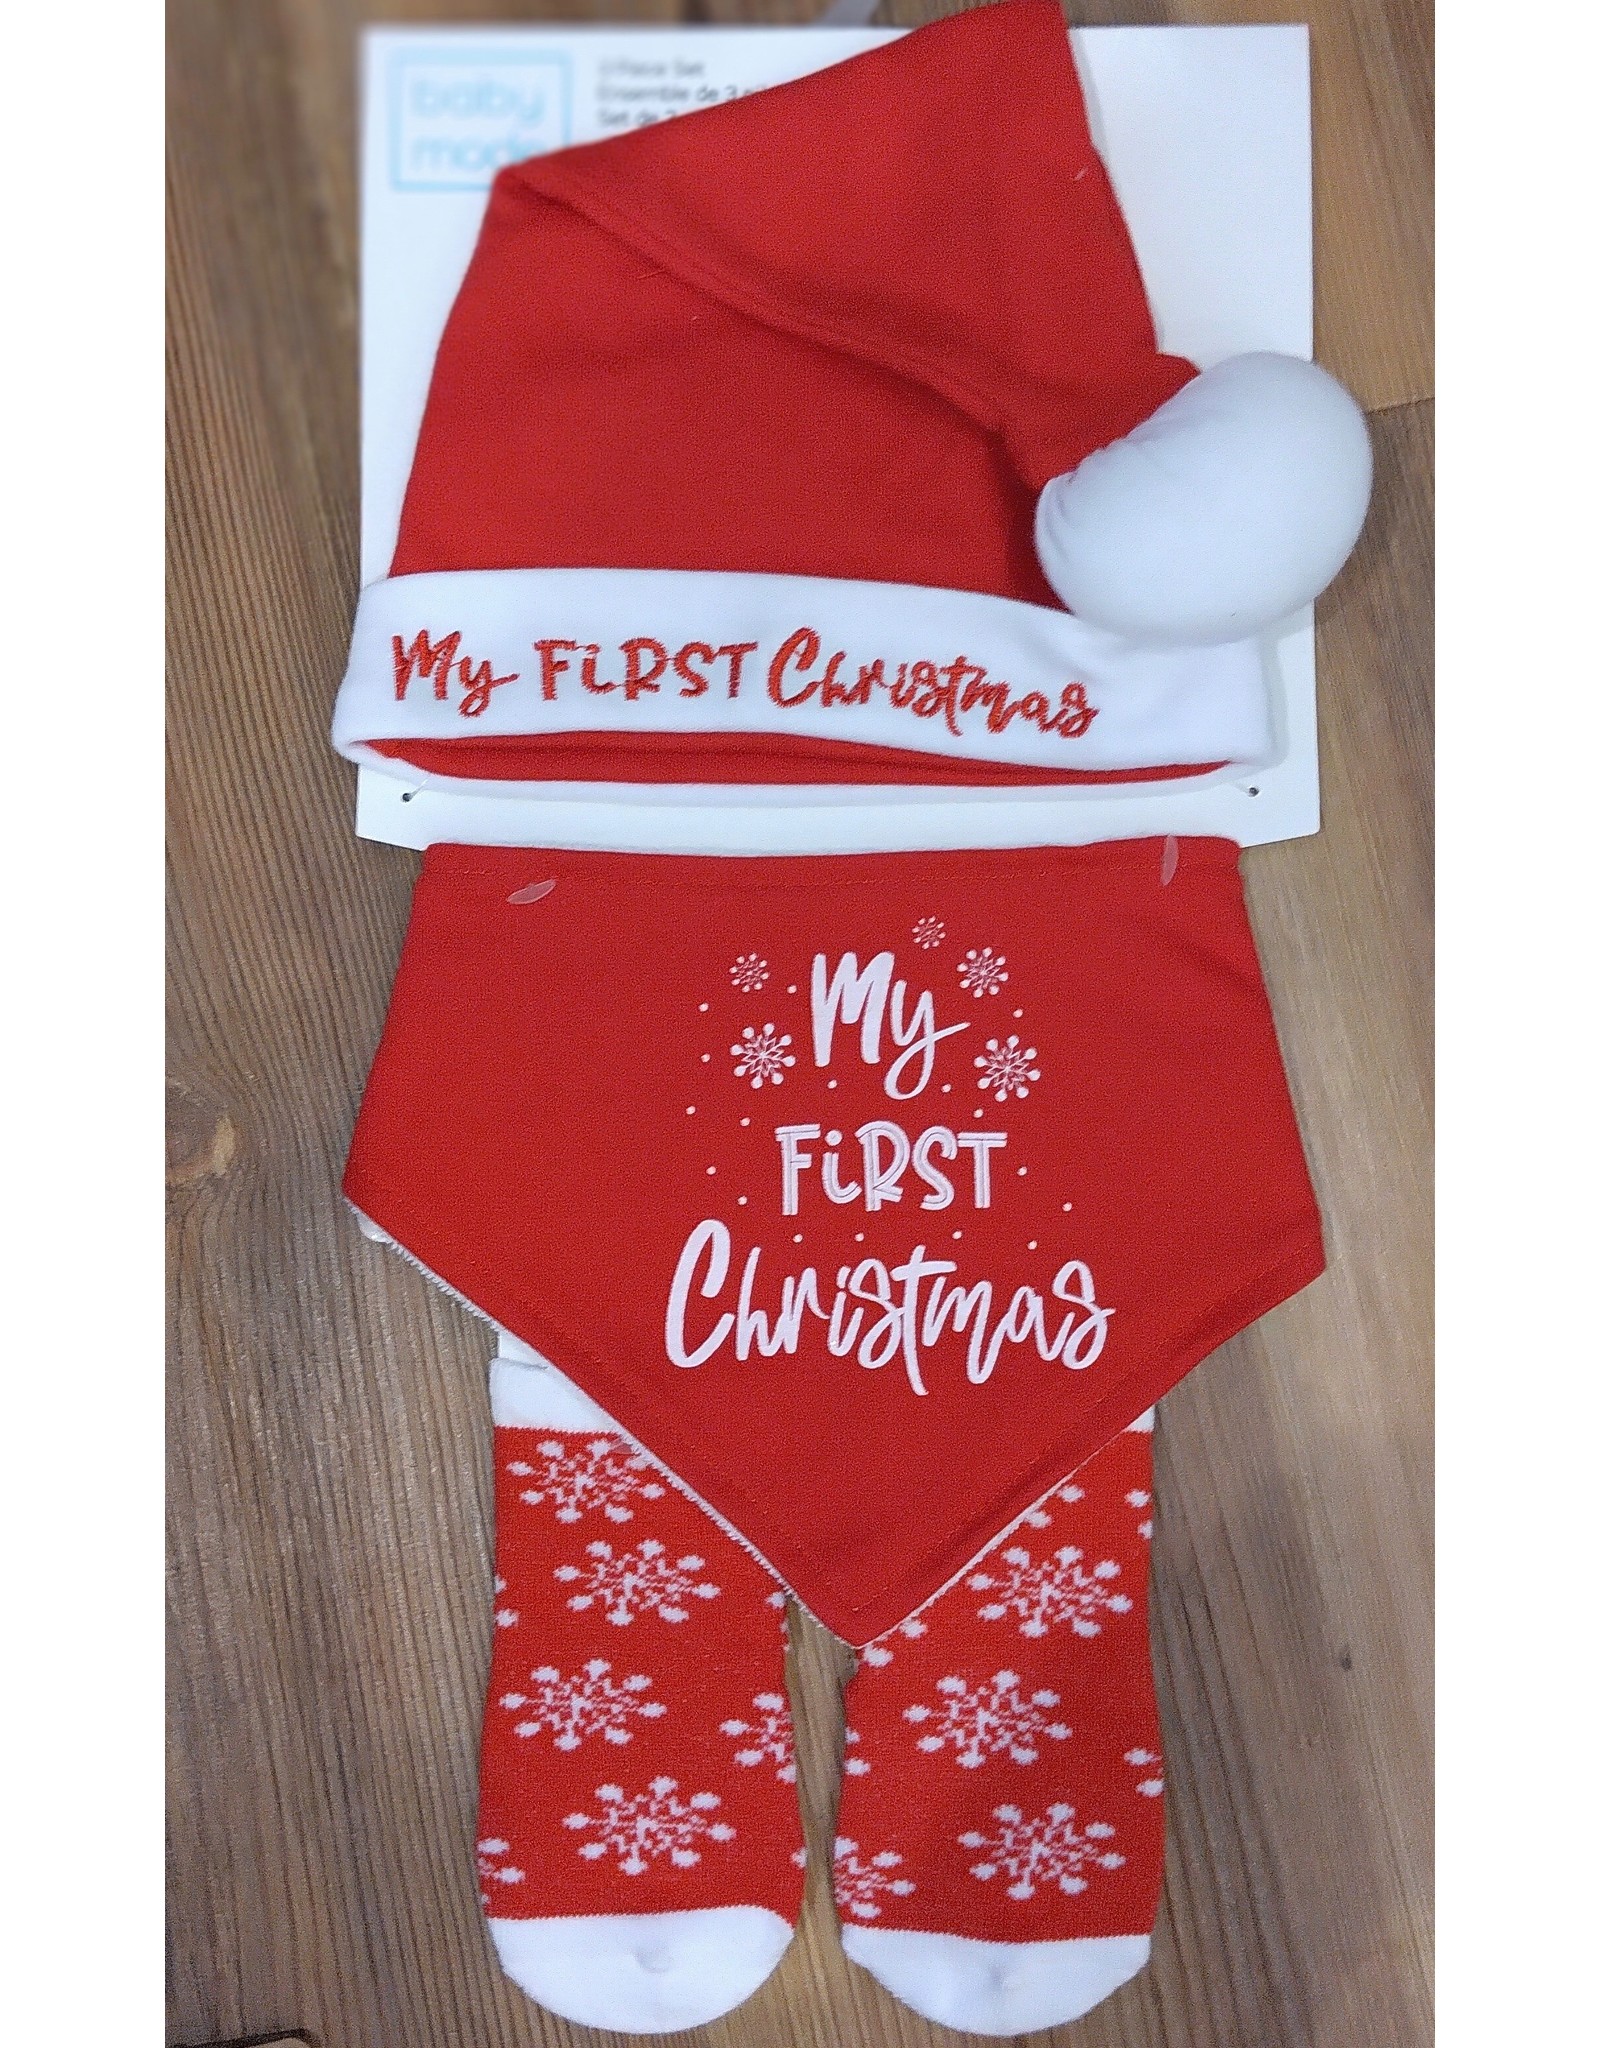 Rose Textiles Holiday 3 Piece Set - First Christmas Red